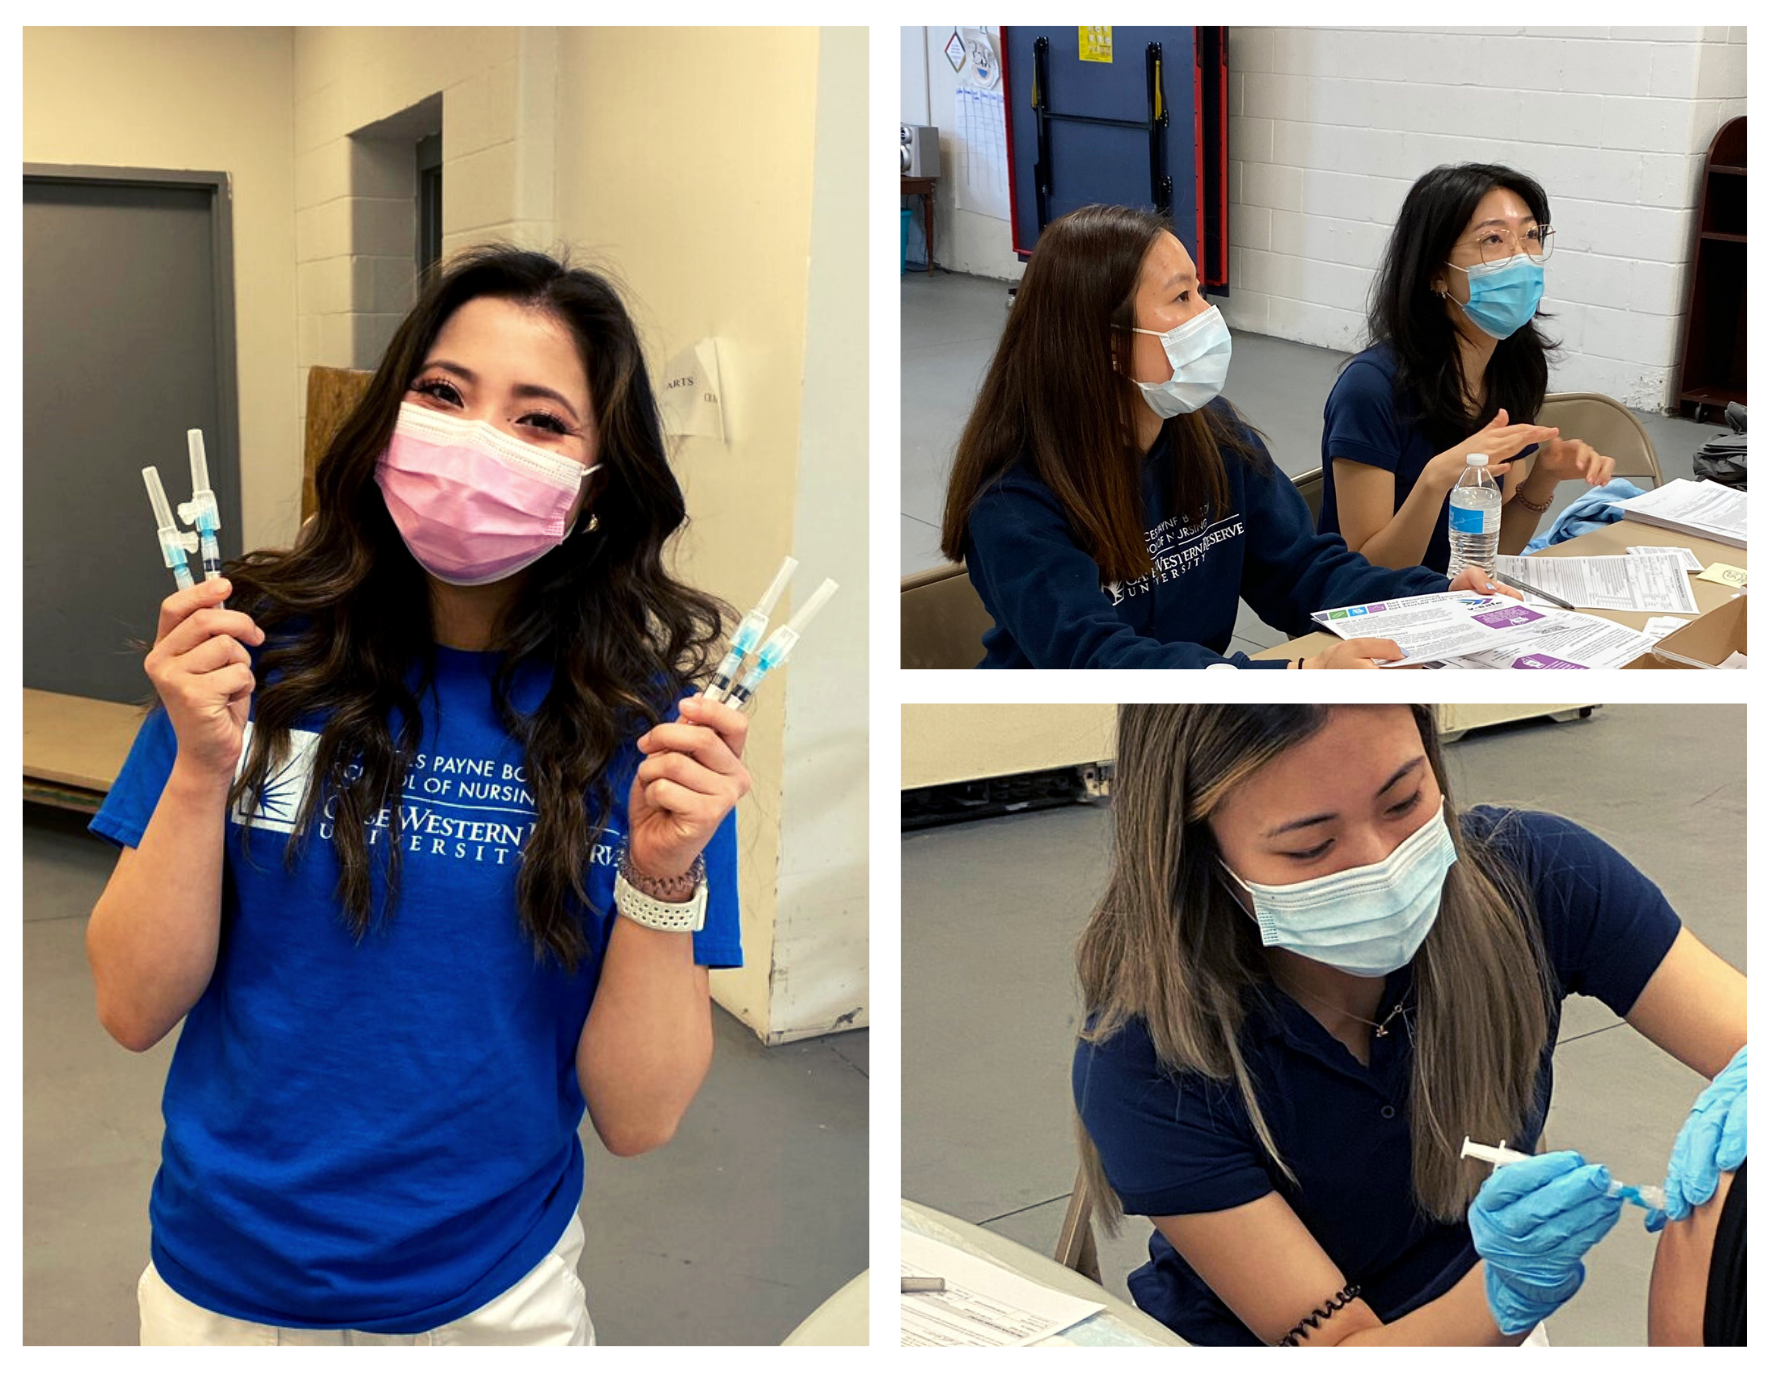 Collage of photos showing students volunteering at a COVID-19 vaccination clinic.